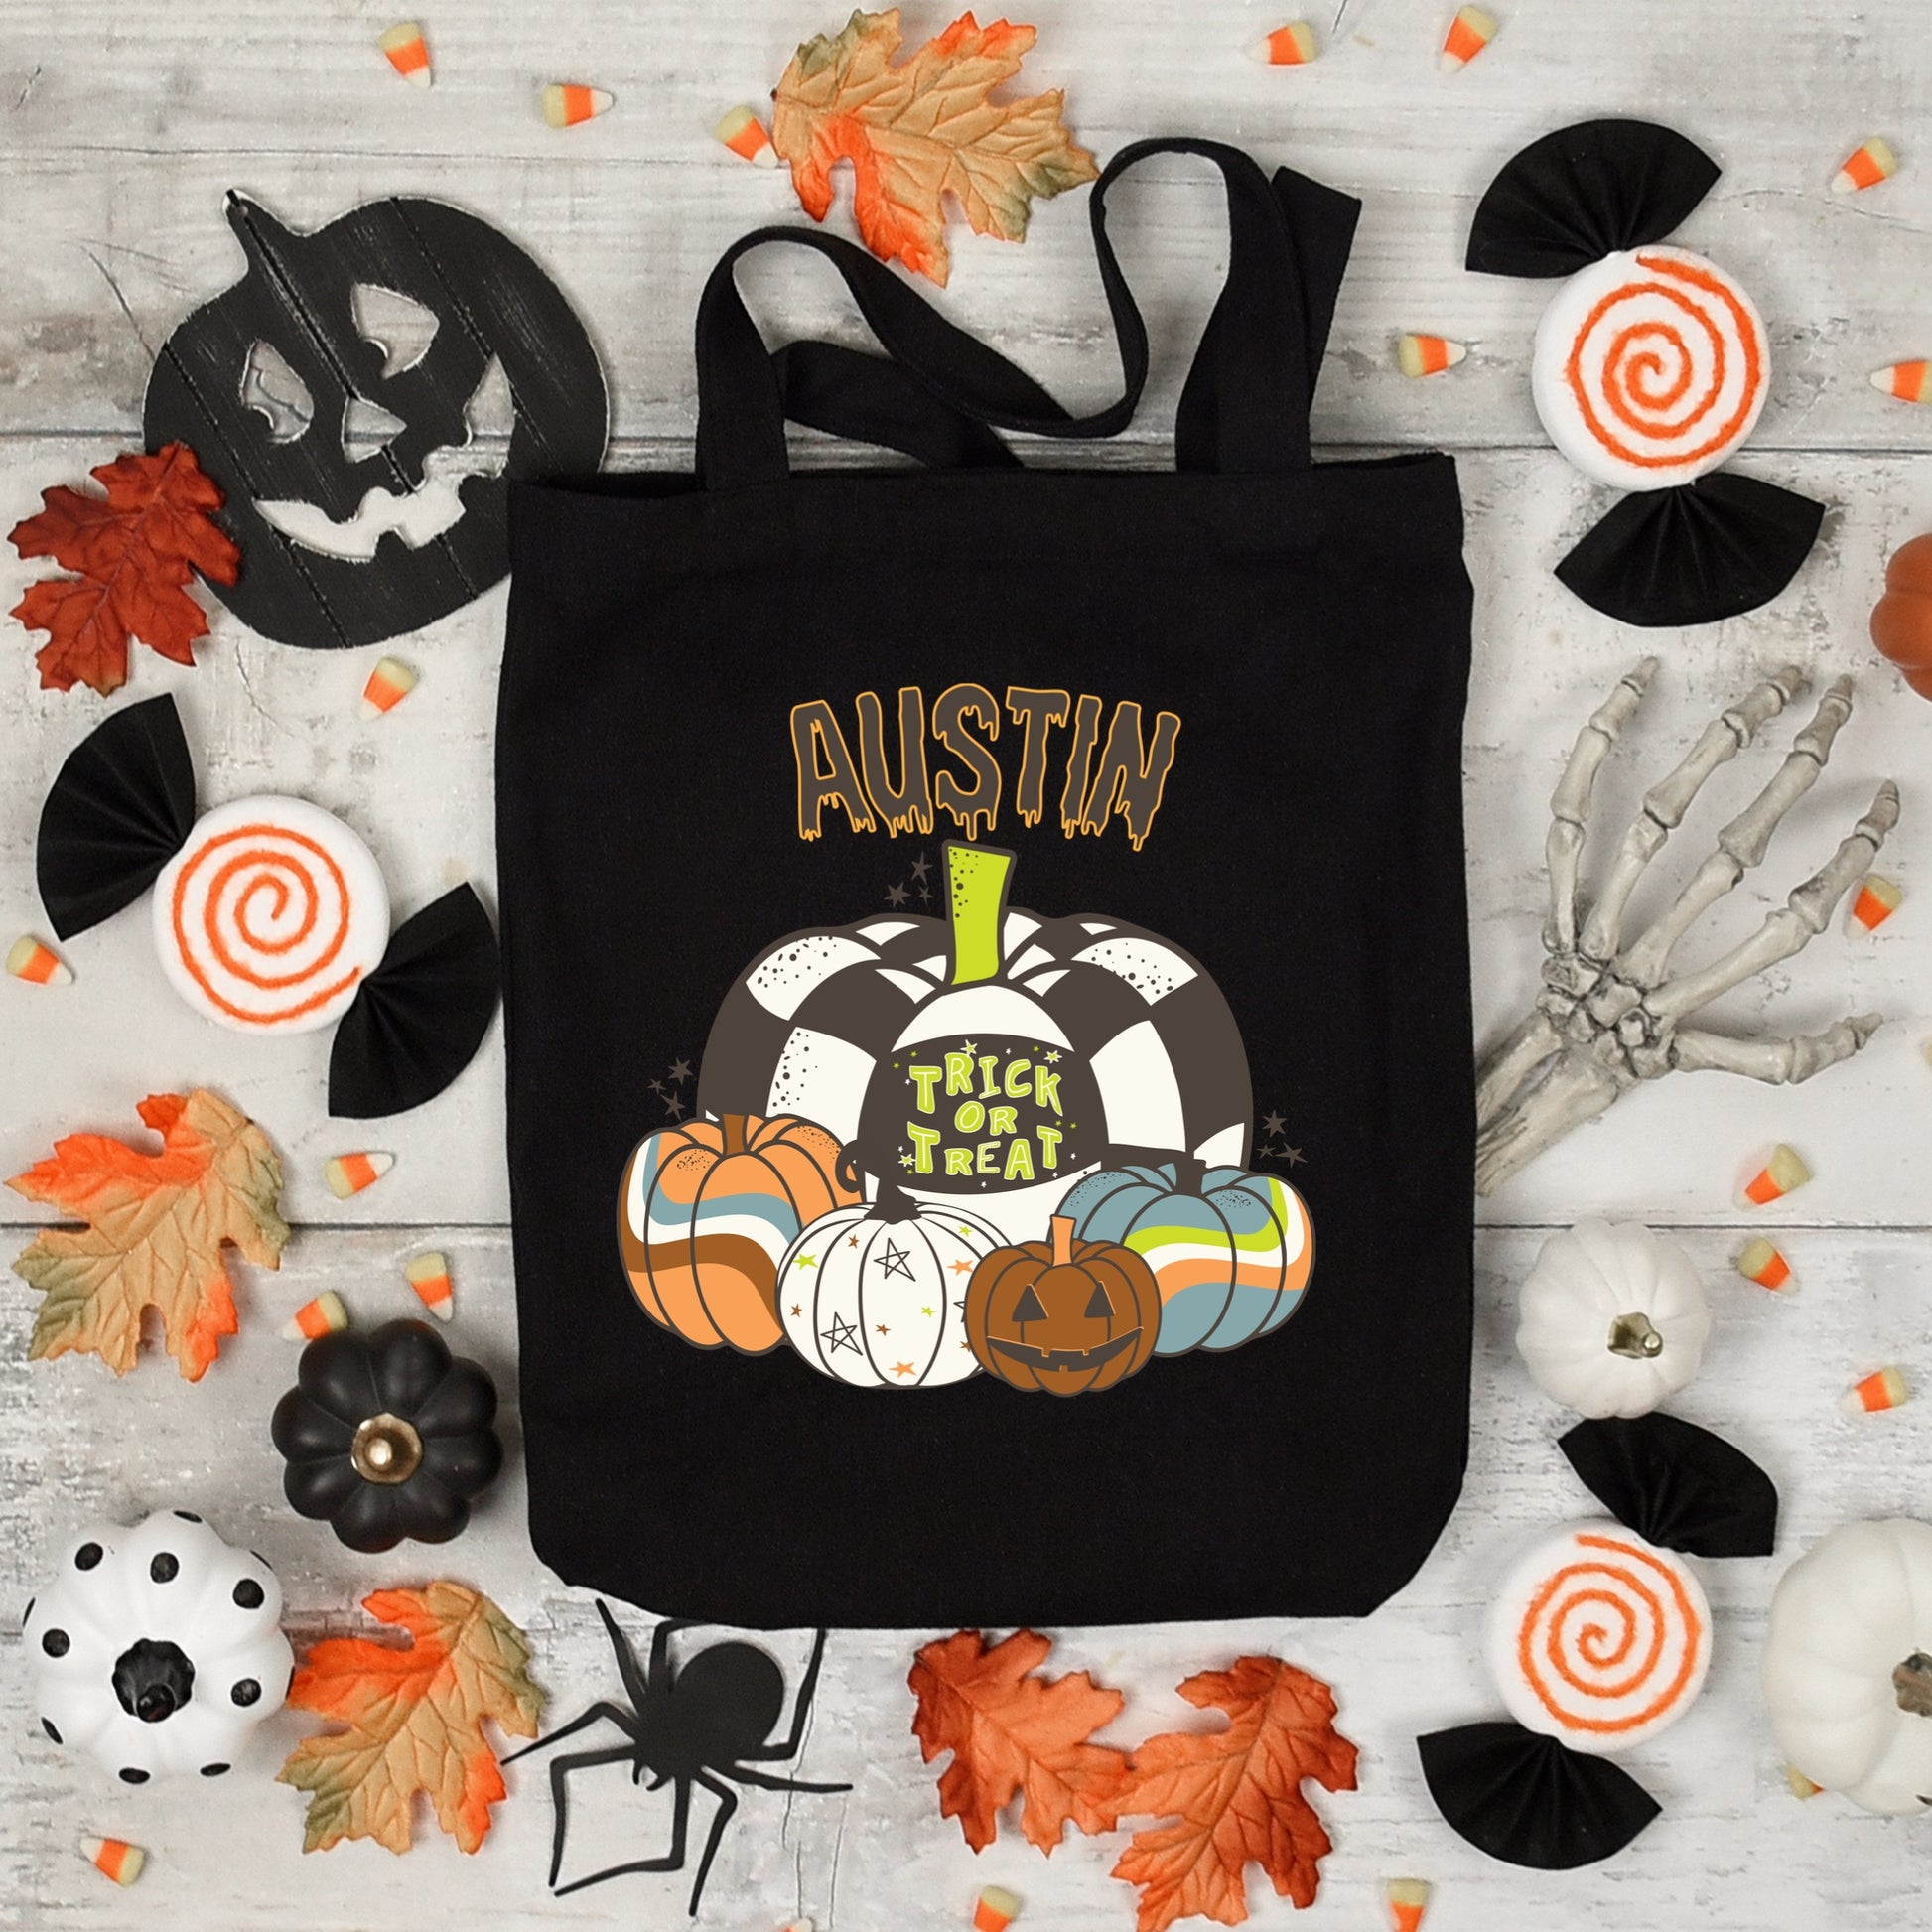 Black Personalized Halloween Trick or Treat Tote Bag with Green, Blue and Orange Pumpkins.